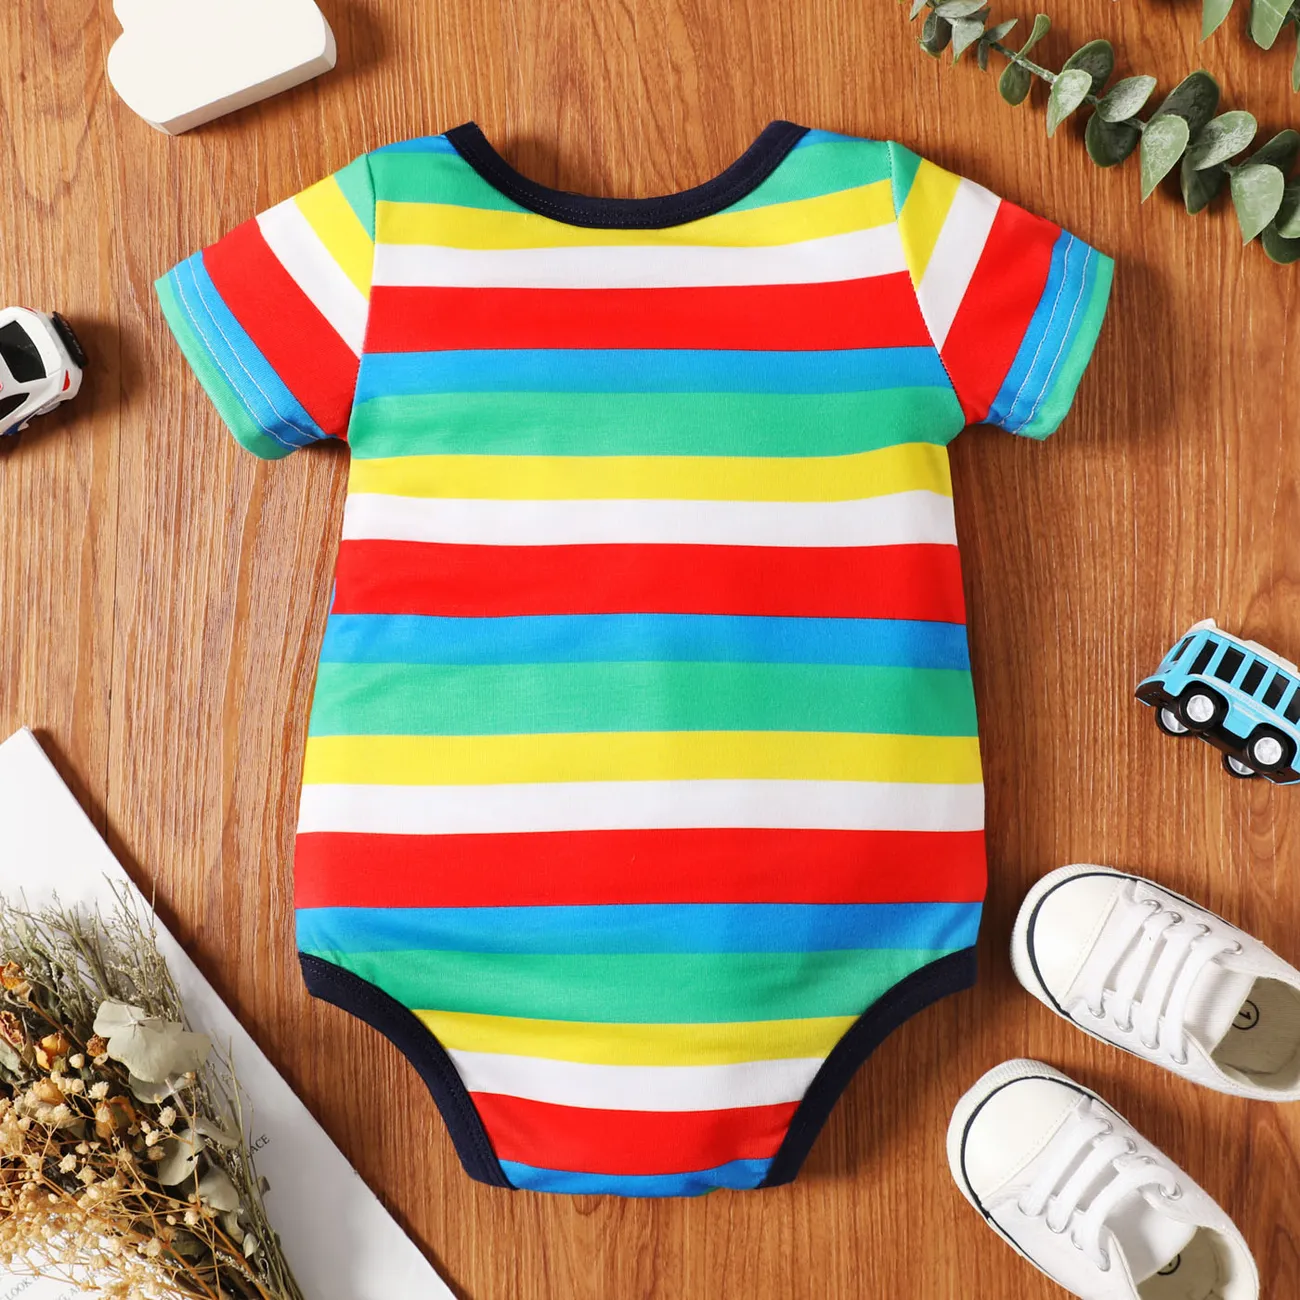 Naia™ Baby Boy Colorful Striped or Vehicle Print Short-sleeve Romper COLOREDSTRIPES big image 1